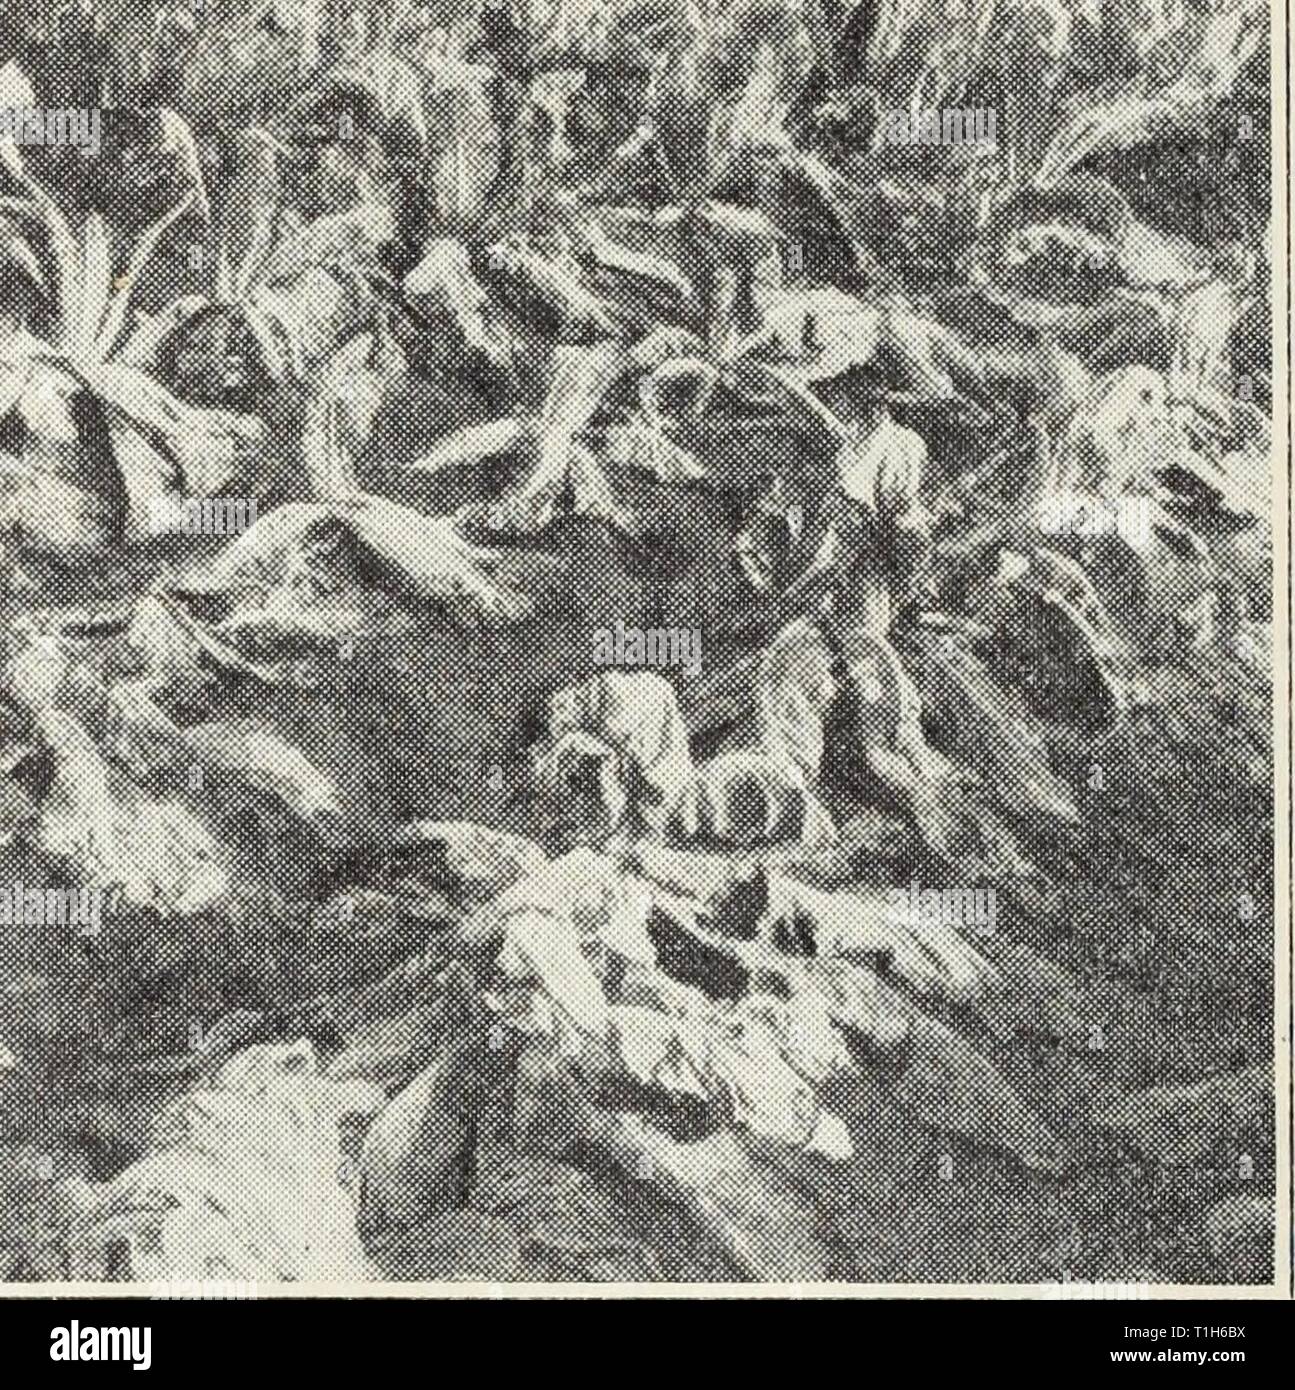 Diseases of truck crops  Diseases of truck crops / Ralph E. Smith  diseasesoftruckc119smit Year: 1940  im - ji.    Fig. 23.—Cauliflower plants affected by root rot in a low, wet corner of the field. fected plants is the only method known at present for holding these virus diseases in check. White Rust.—In this disease, the stems, leaves, or flower stalks may be swollen and deformed. White, blisterlike, spore pustules of the fungus. Albugo Candida, appear on the surface. The disease is not often serious, but is most common on radish and certain cruciferous weeds like shep- herd's purse. Affecte Stock Photo